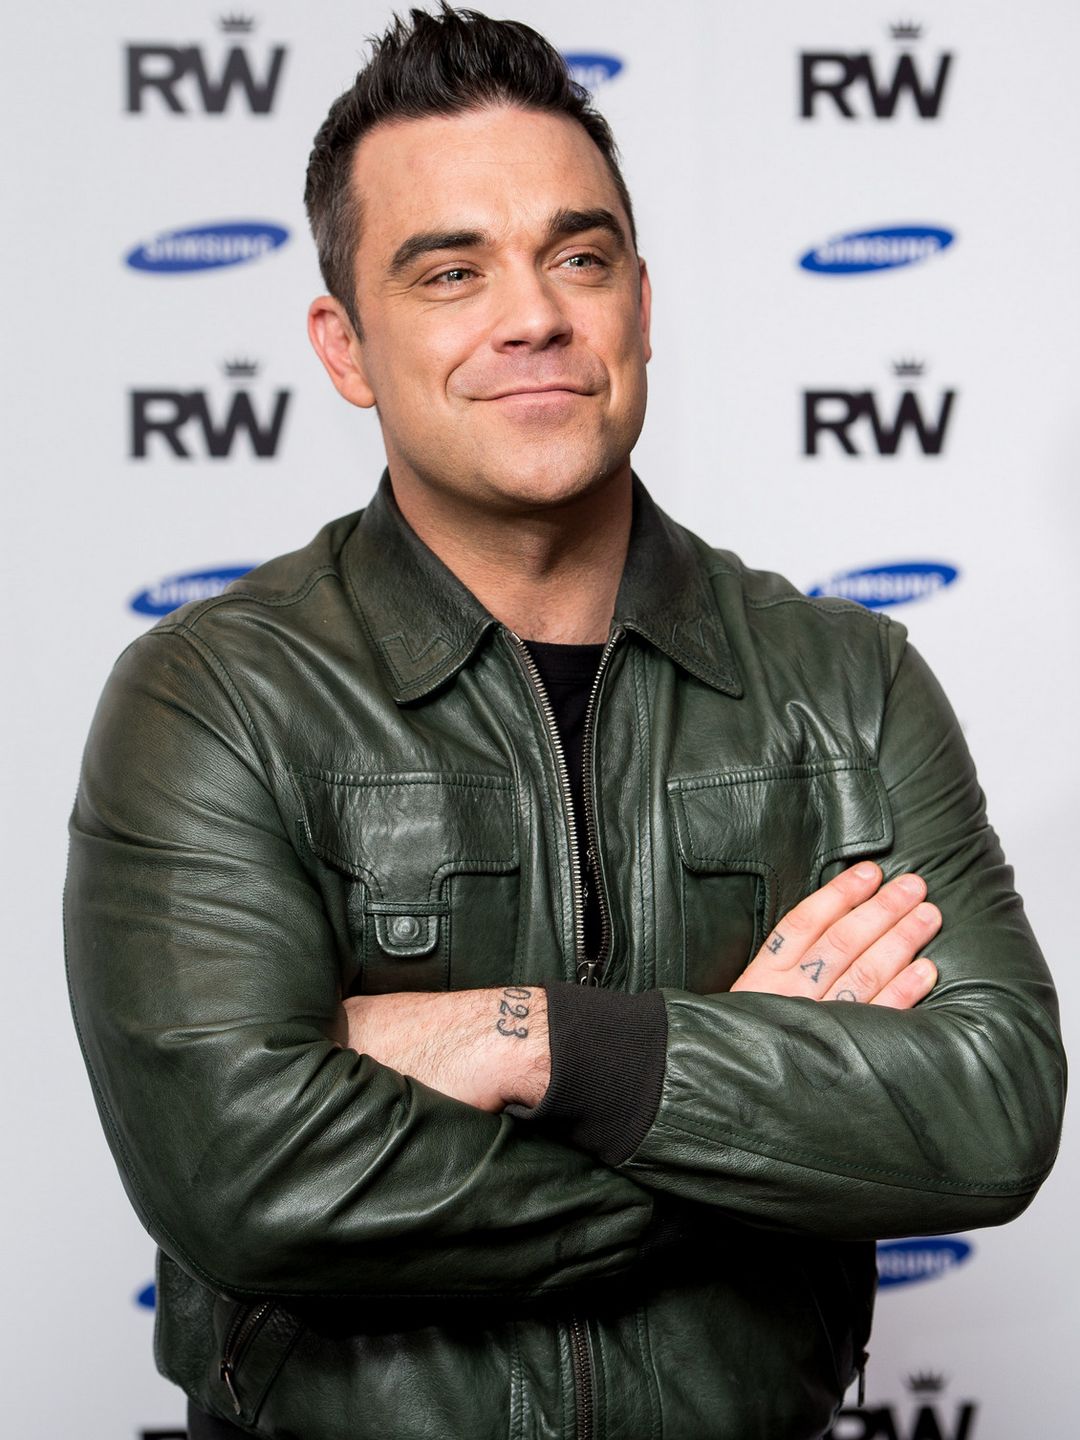 Robbie Williams does he have kids